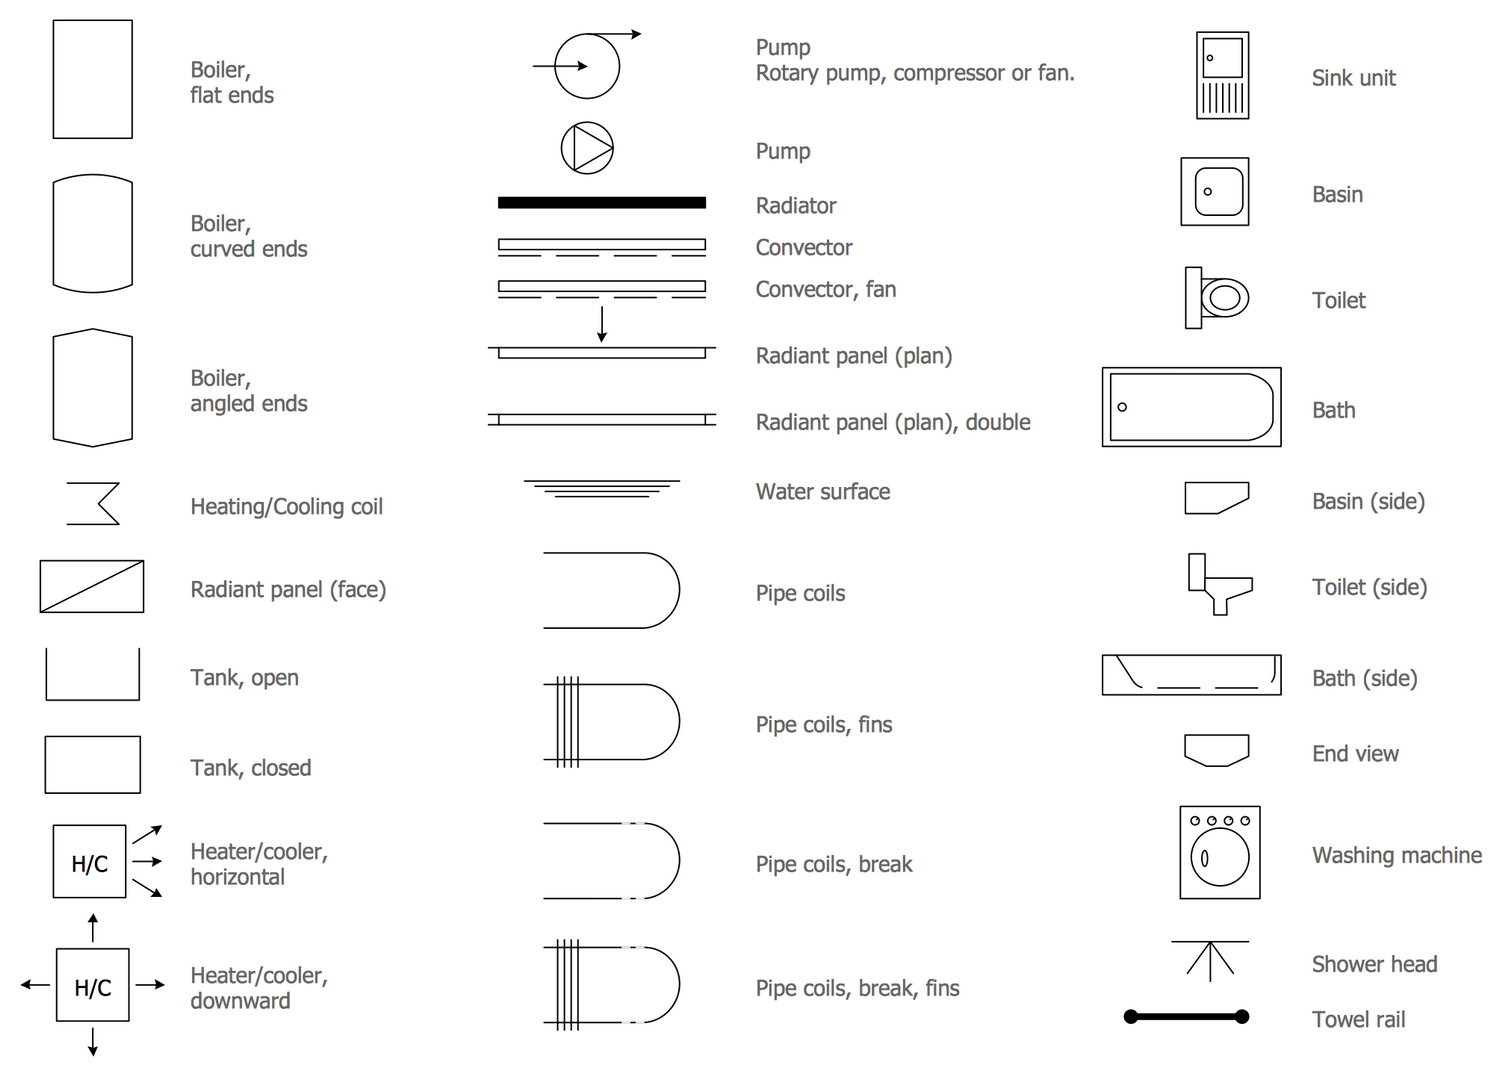 piping orthographic drawing symbols